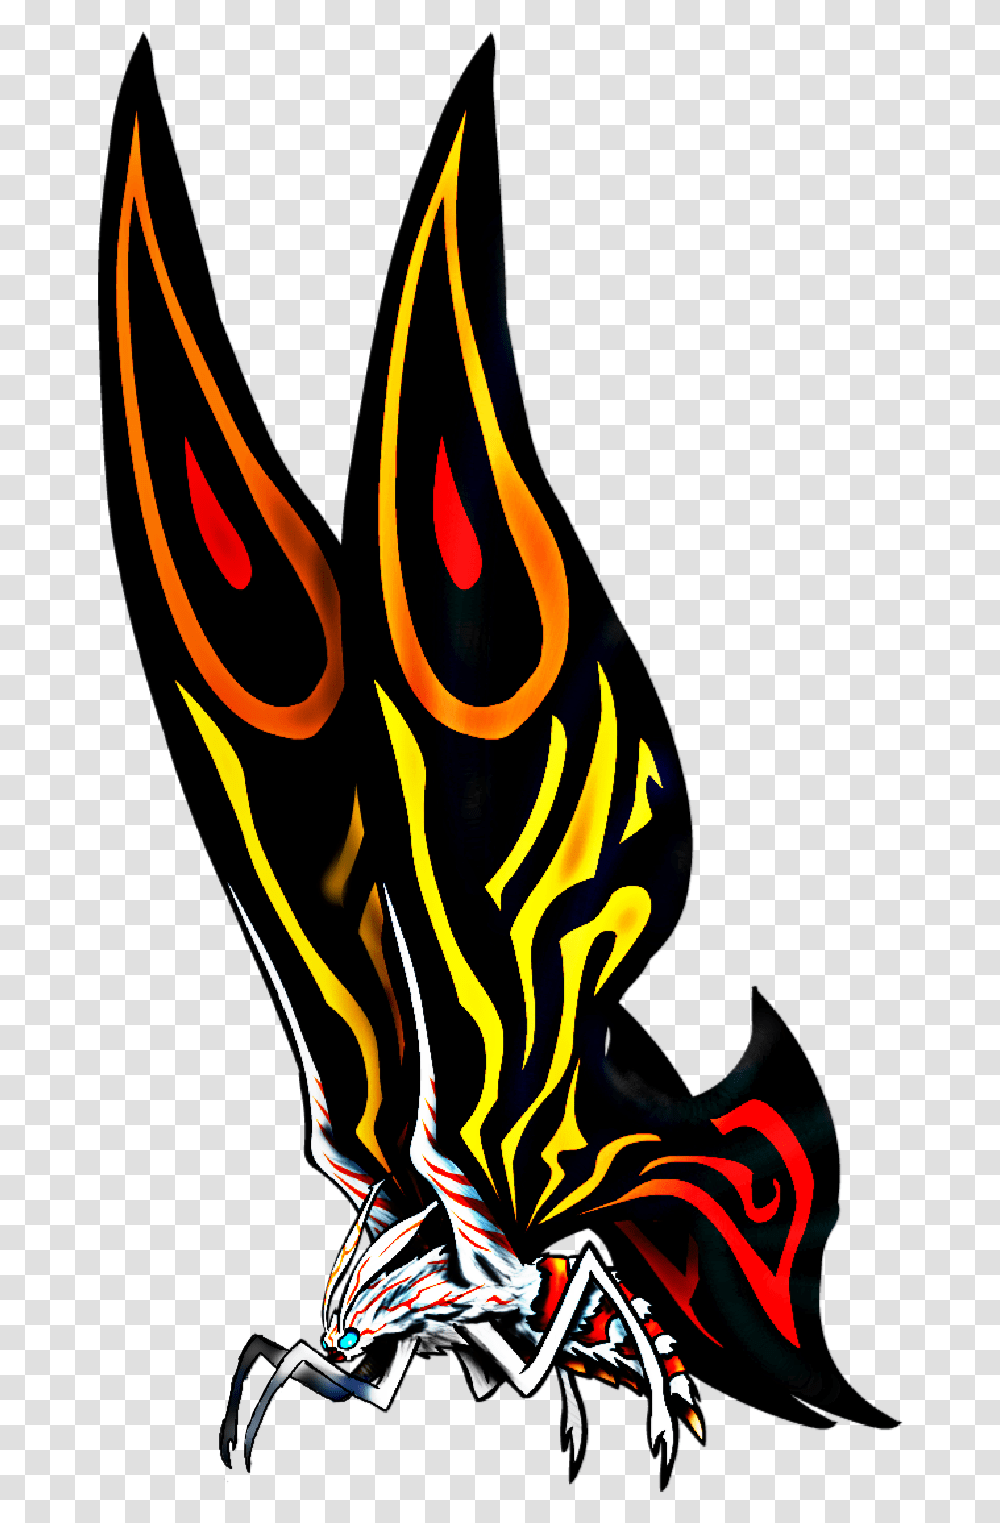 Brothersofwaruniverse Mothra Queenofthemonsters, Fire, Flame, Bonfire Transparent Png